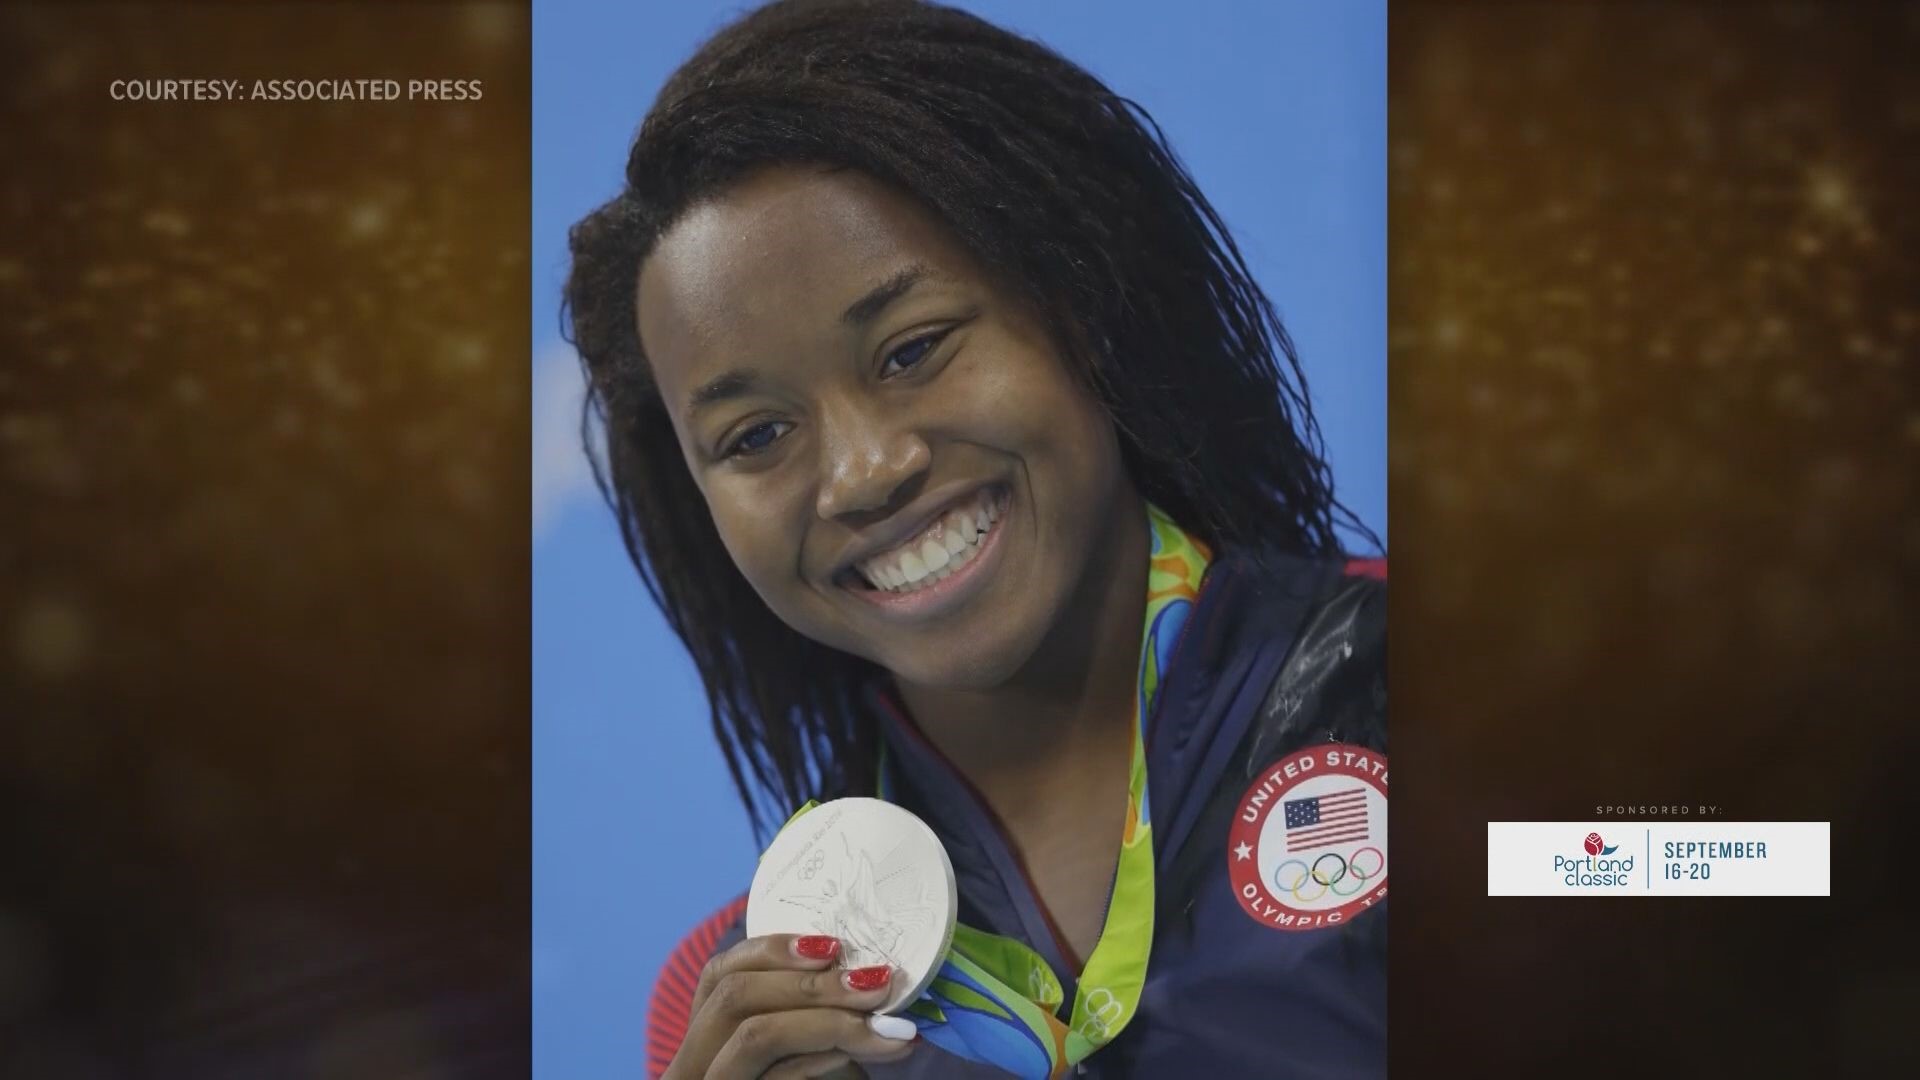 Aside from collecting Olympic medals, Simone Manuel focuses on bringing inclusivity to swimming.